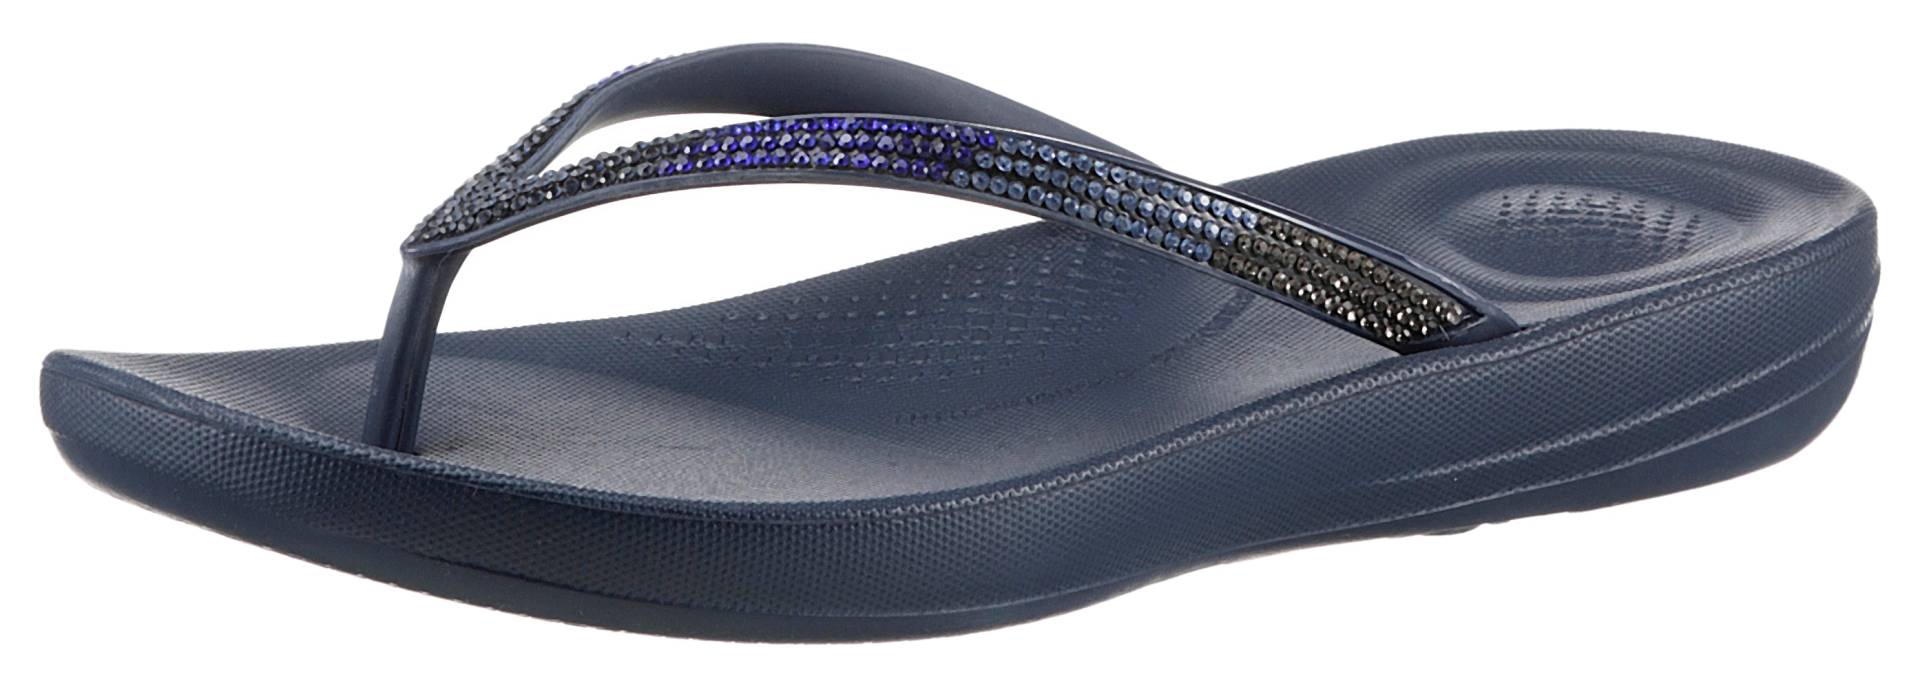 Fitflop Zehentrenner »IQUSHION OMBRE SPARKLE« von Fitflop